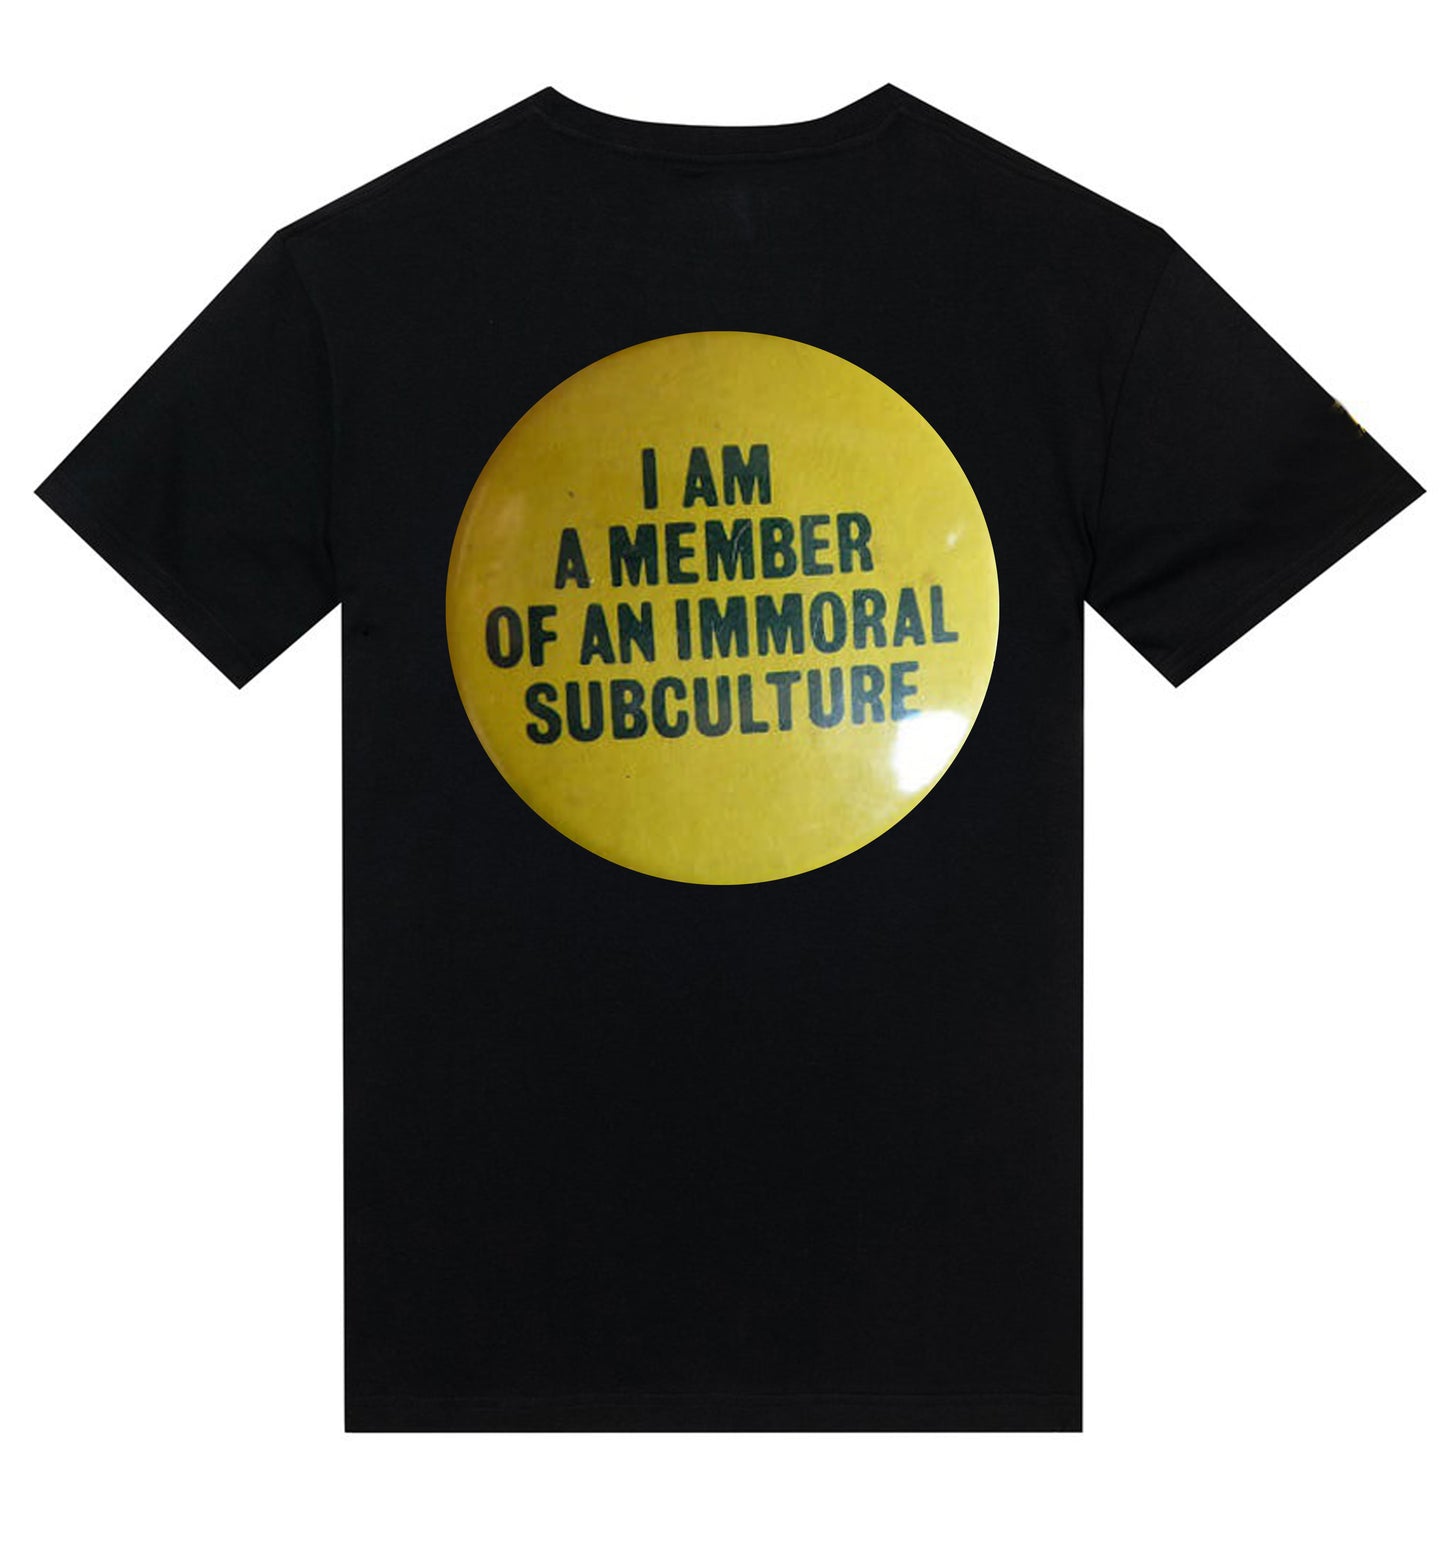 T-shirt "I am a member of an immoral subculture"